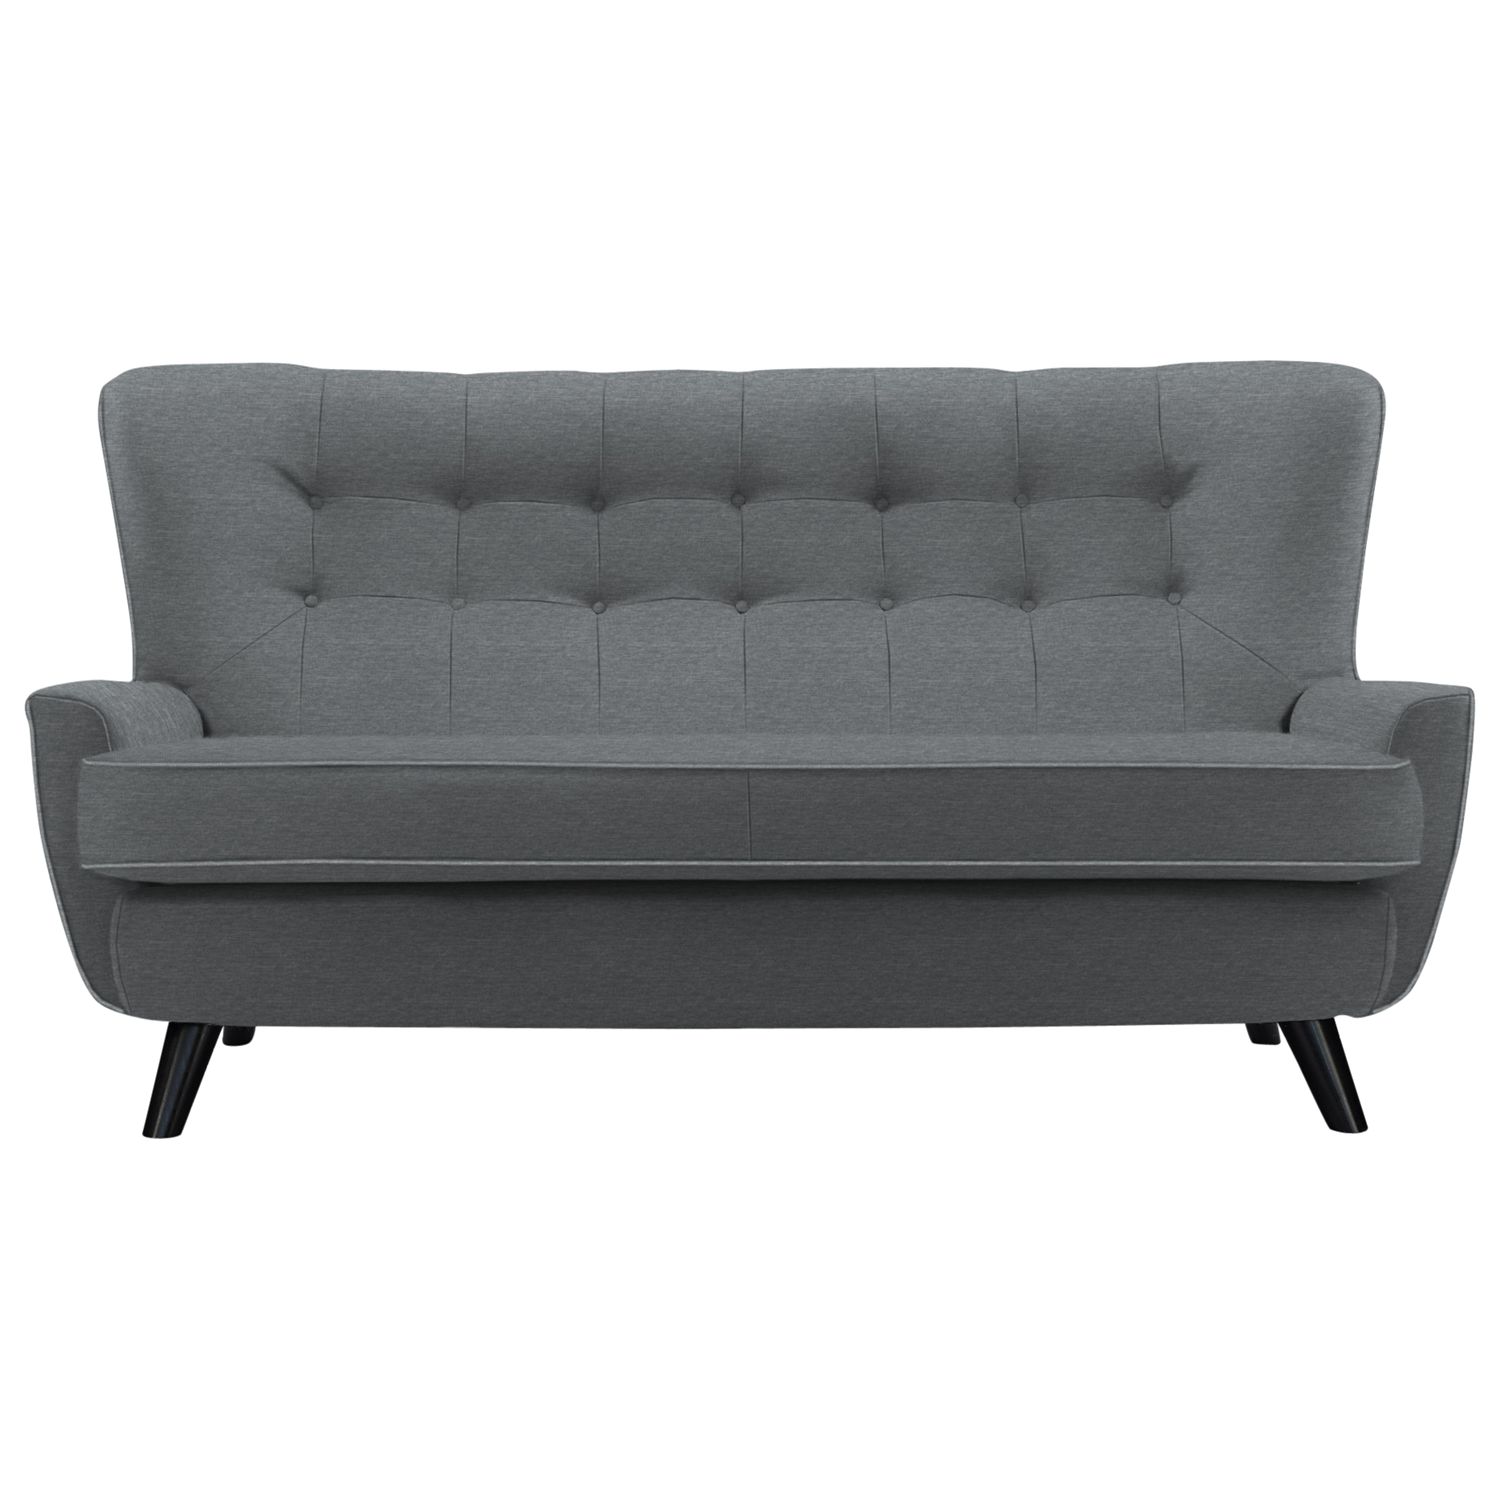 G Plan Vintage The Sixty One Large Sofa, Tonic Oil, width 185cm